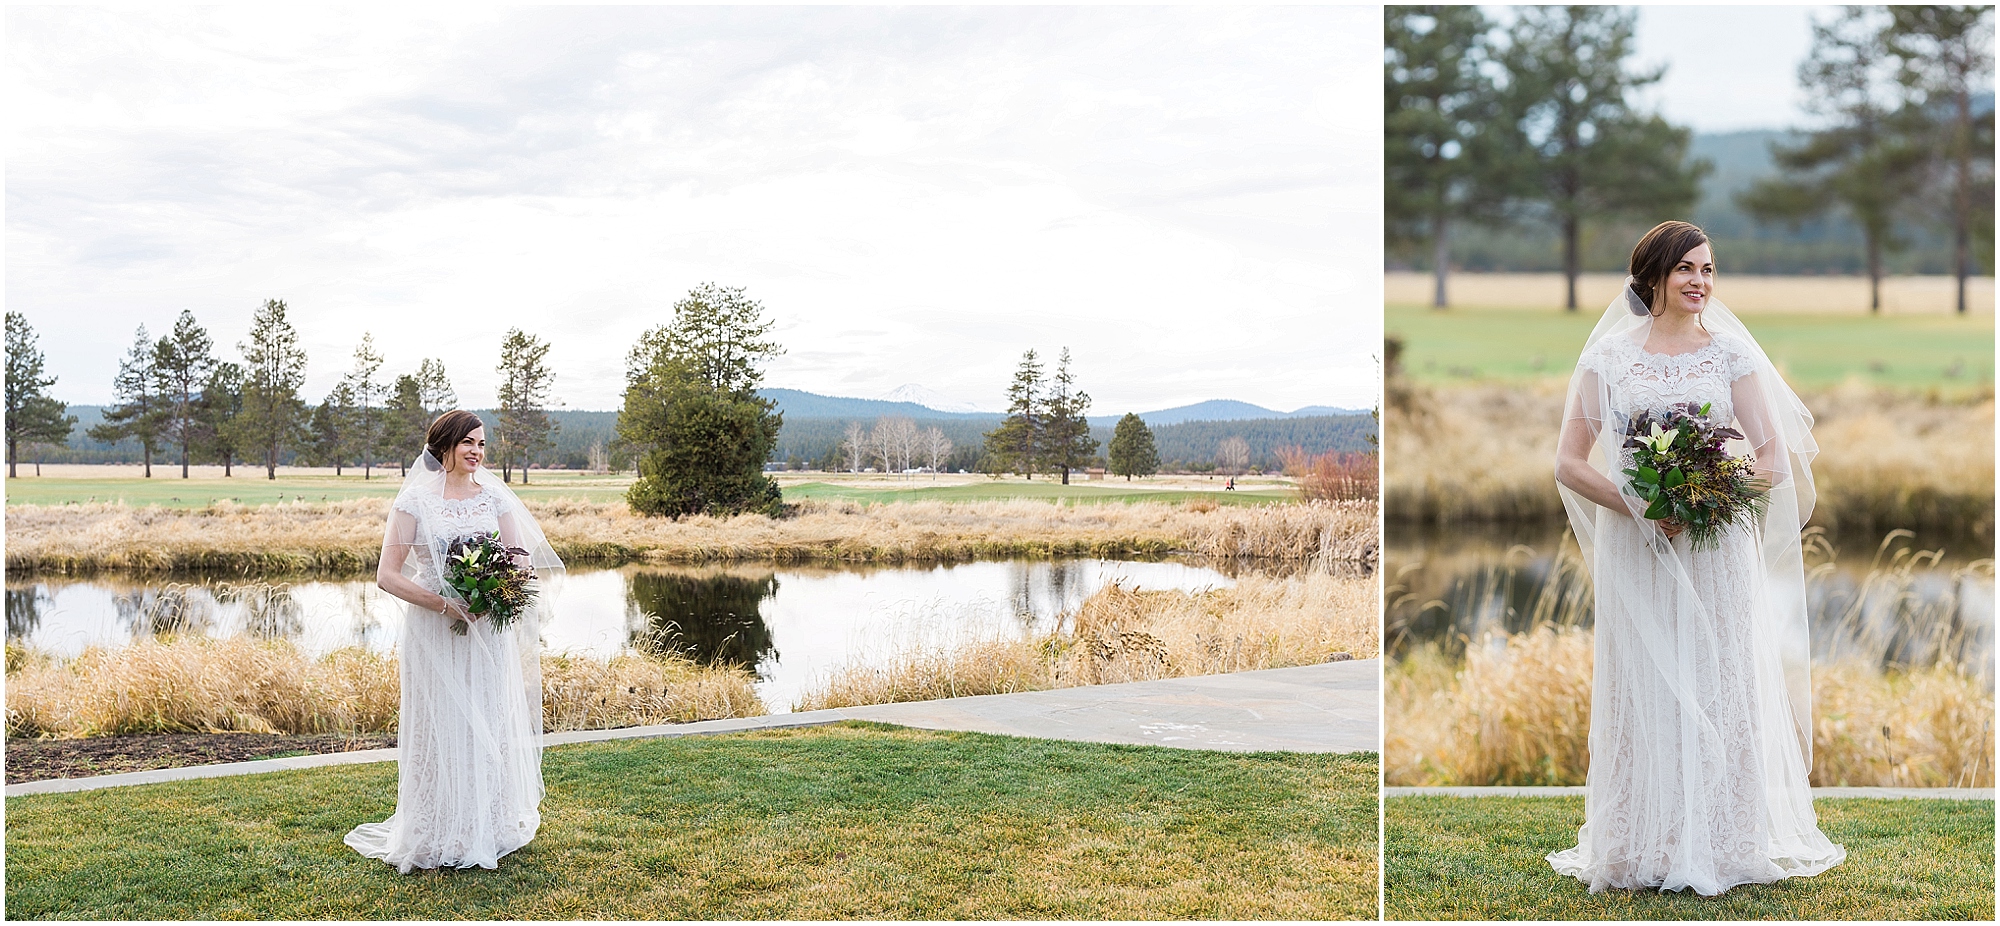 Gorgeous bridal portraits at this Sunriver Resort winter wedding in Oregon. | Erica Swantek Photography